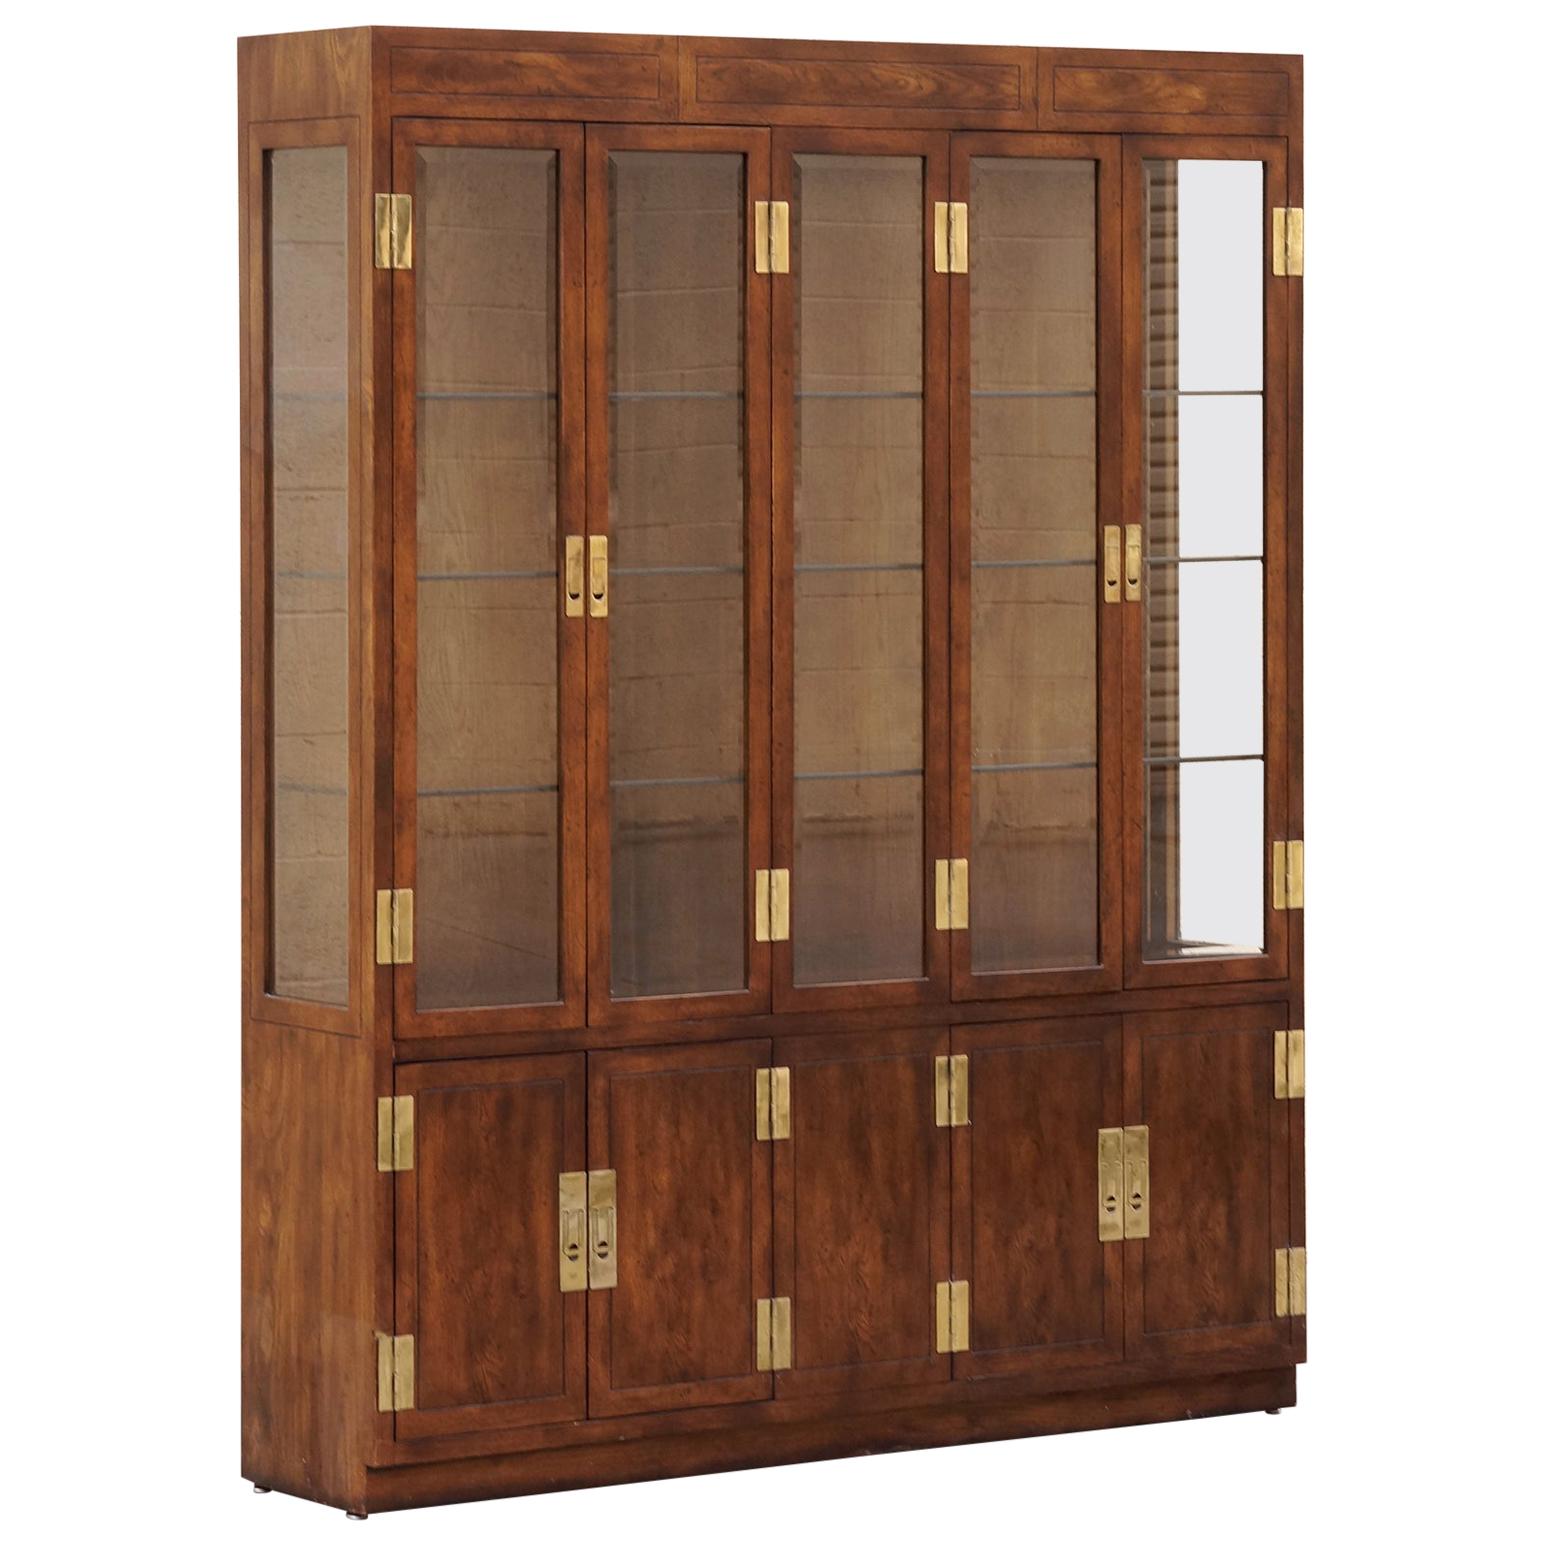 1970s "Campaign Series" Modern China Cabinet by Henredon